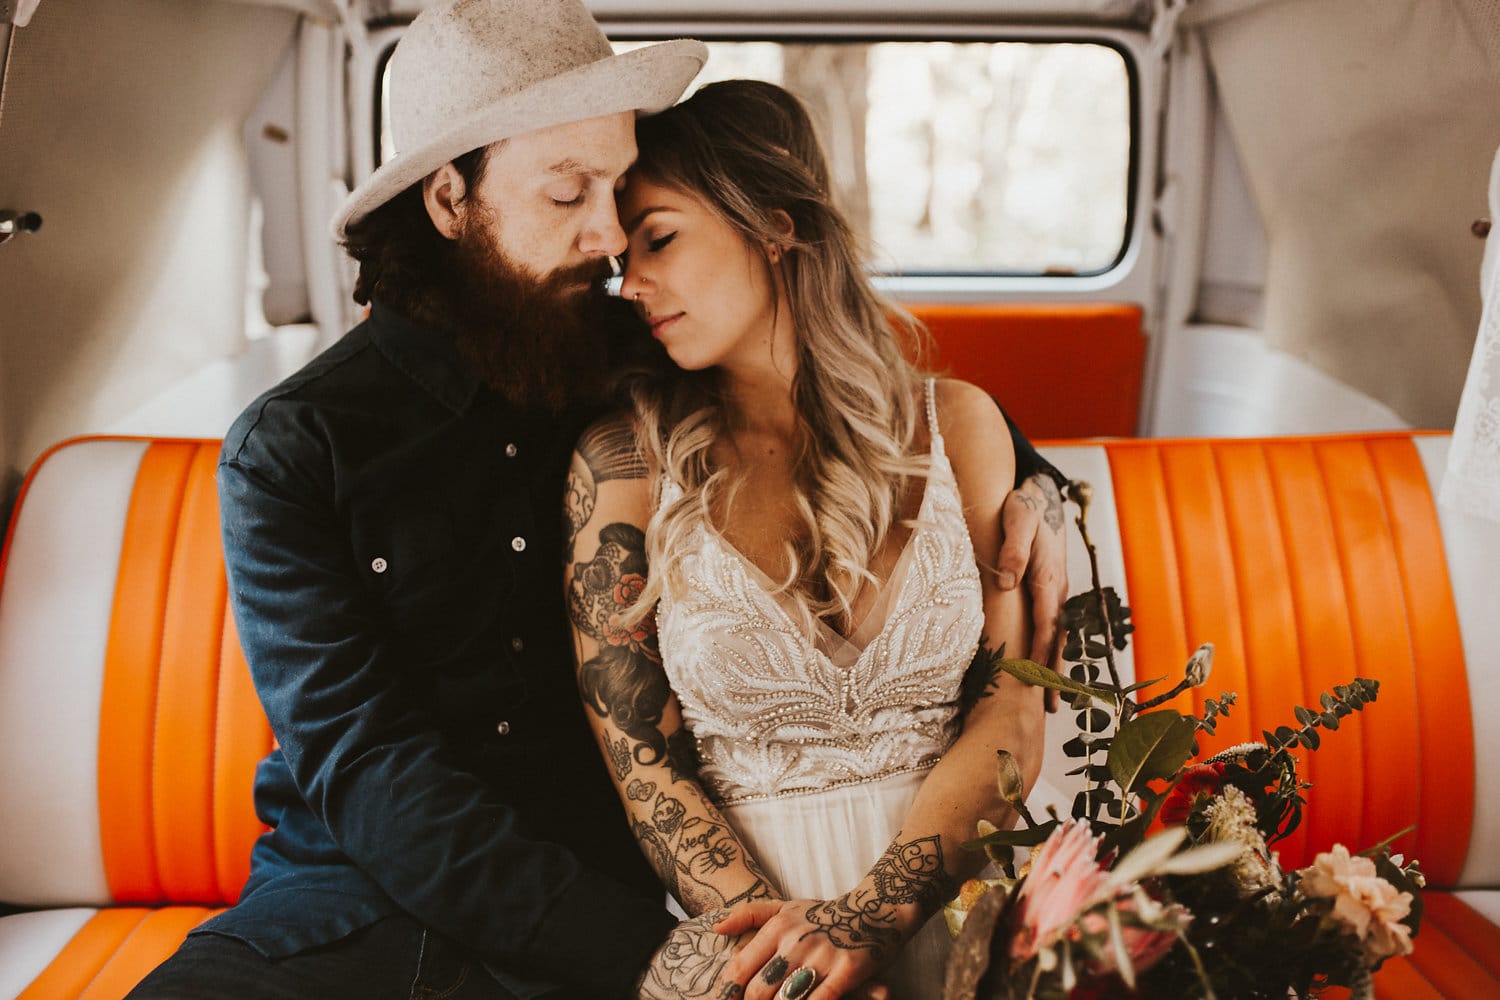 Rock ‘N’ Roll Styled Shoot Featuring Beaded Lace Gown and Camper Van. Charlene wedding dress by Maggie Sottero.